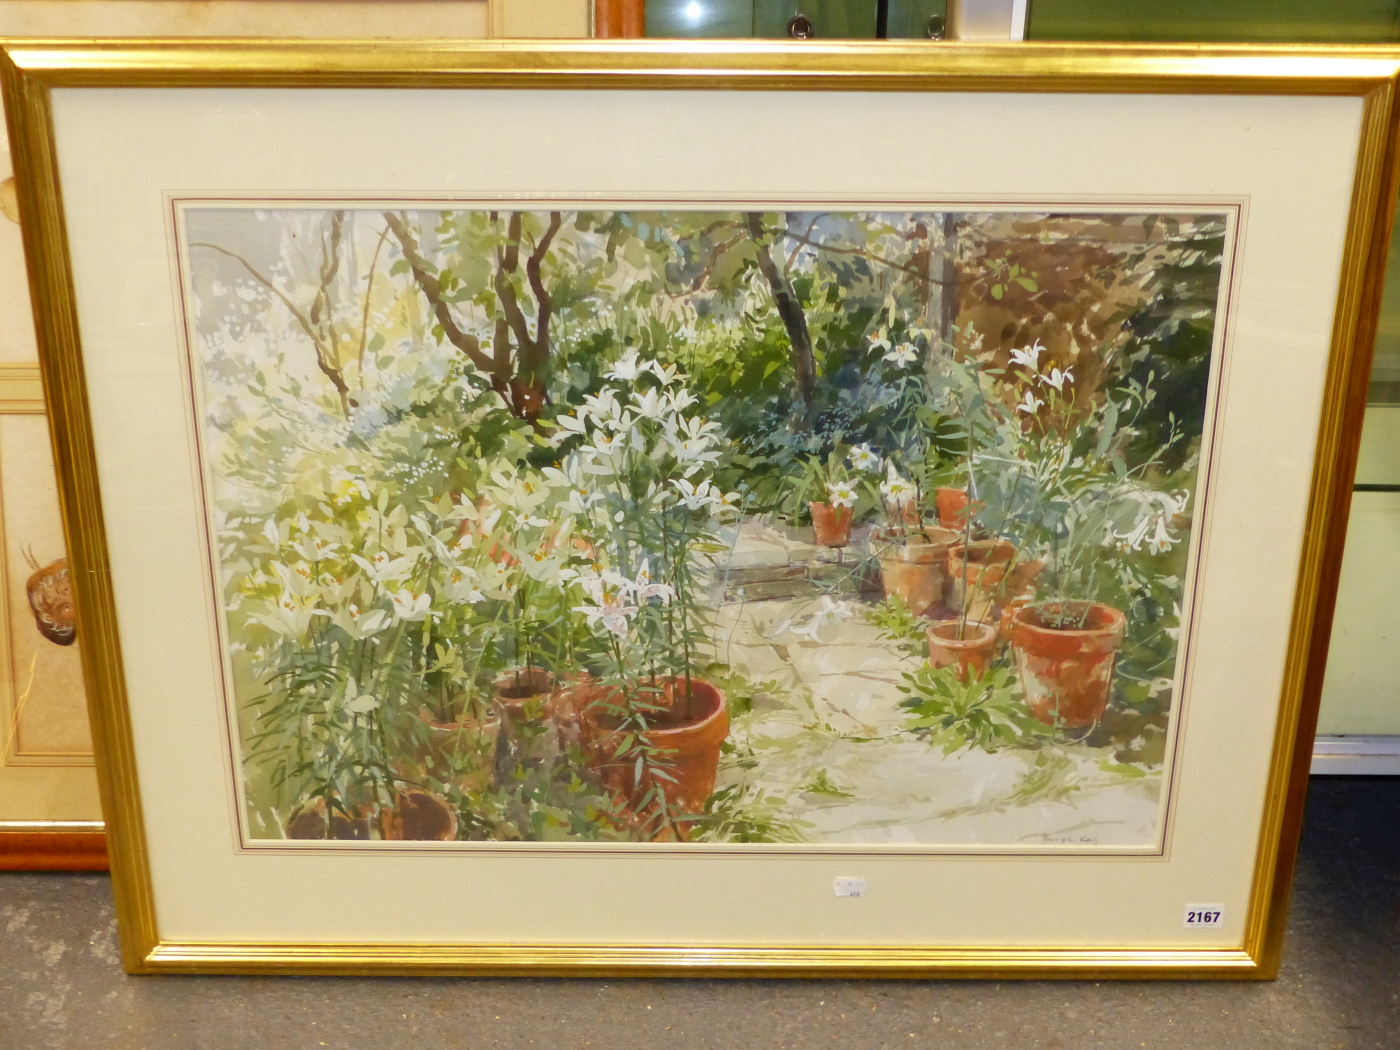 PAMELA KAY. CONTEMPORARY. ARR. LILLIES IN THE GARDEN, SIGNED WATERCOLOUR, GALLERY LABEL VERSO. 50 - Image 2 of 6